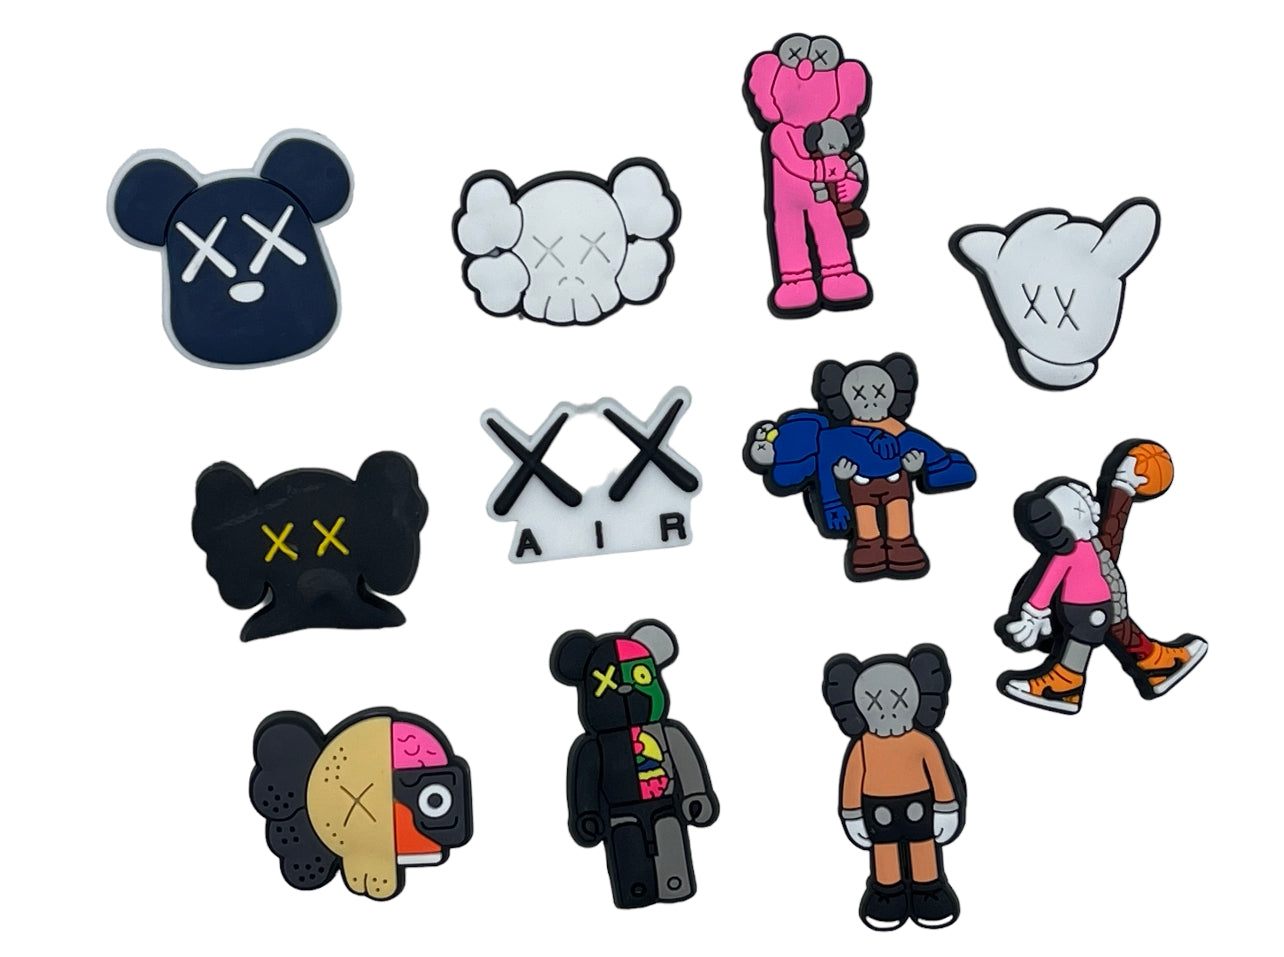 Replying to @azma1r Episode 7 Kaws Croc Charms✨ What color/style